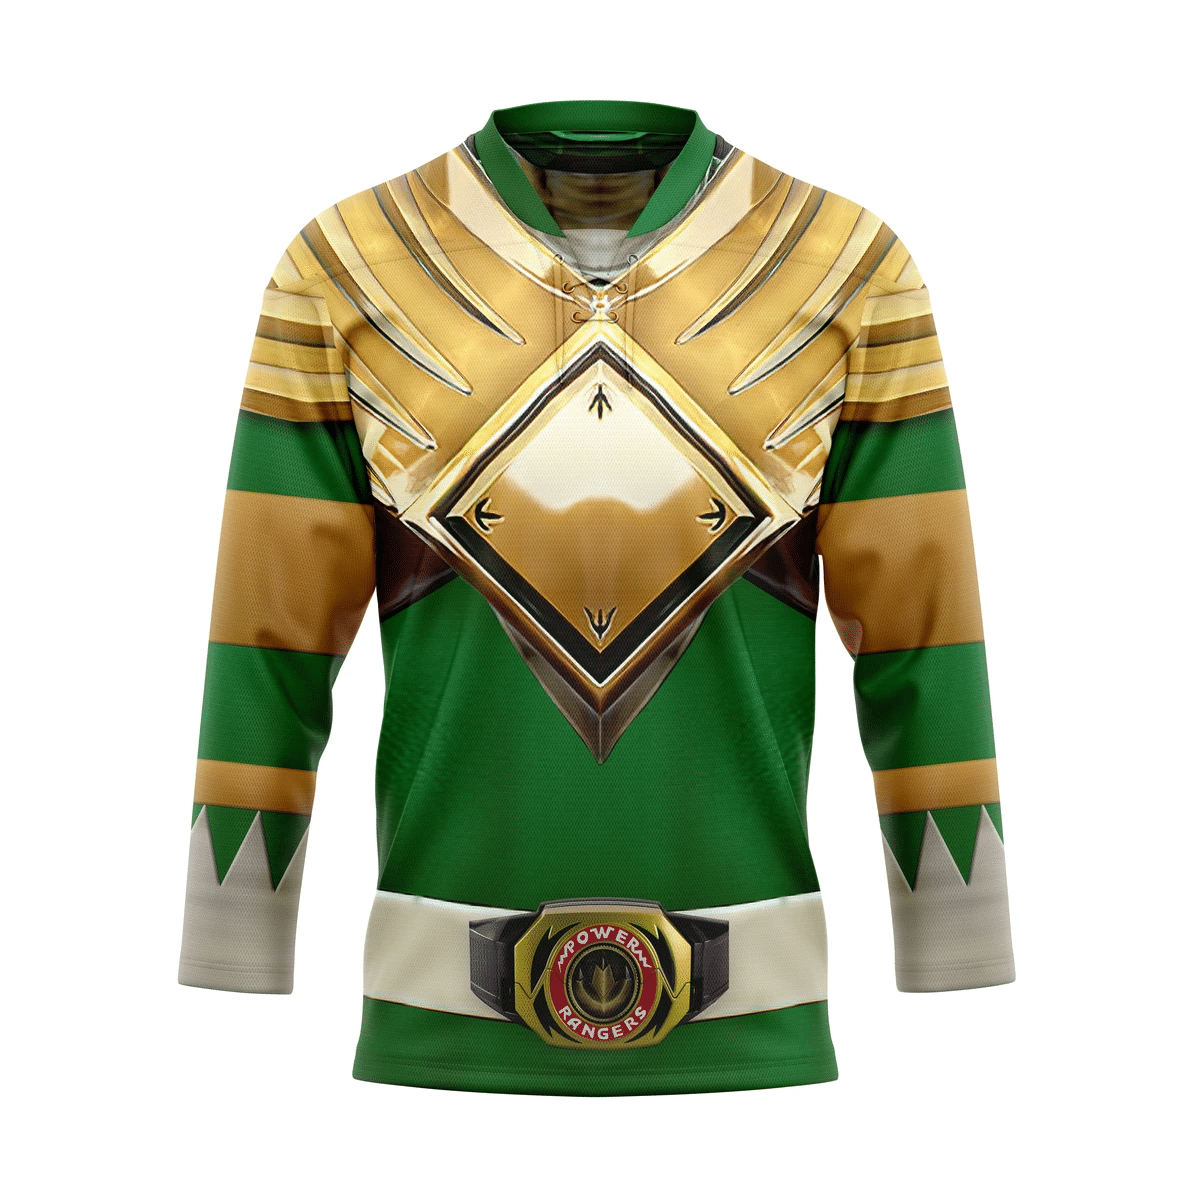 The style of a hockey jersey should match your personality. 142